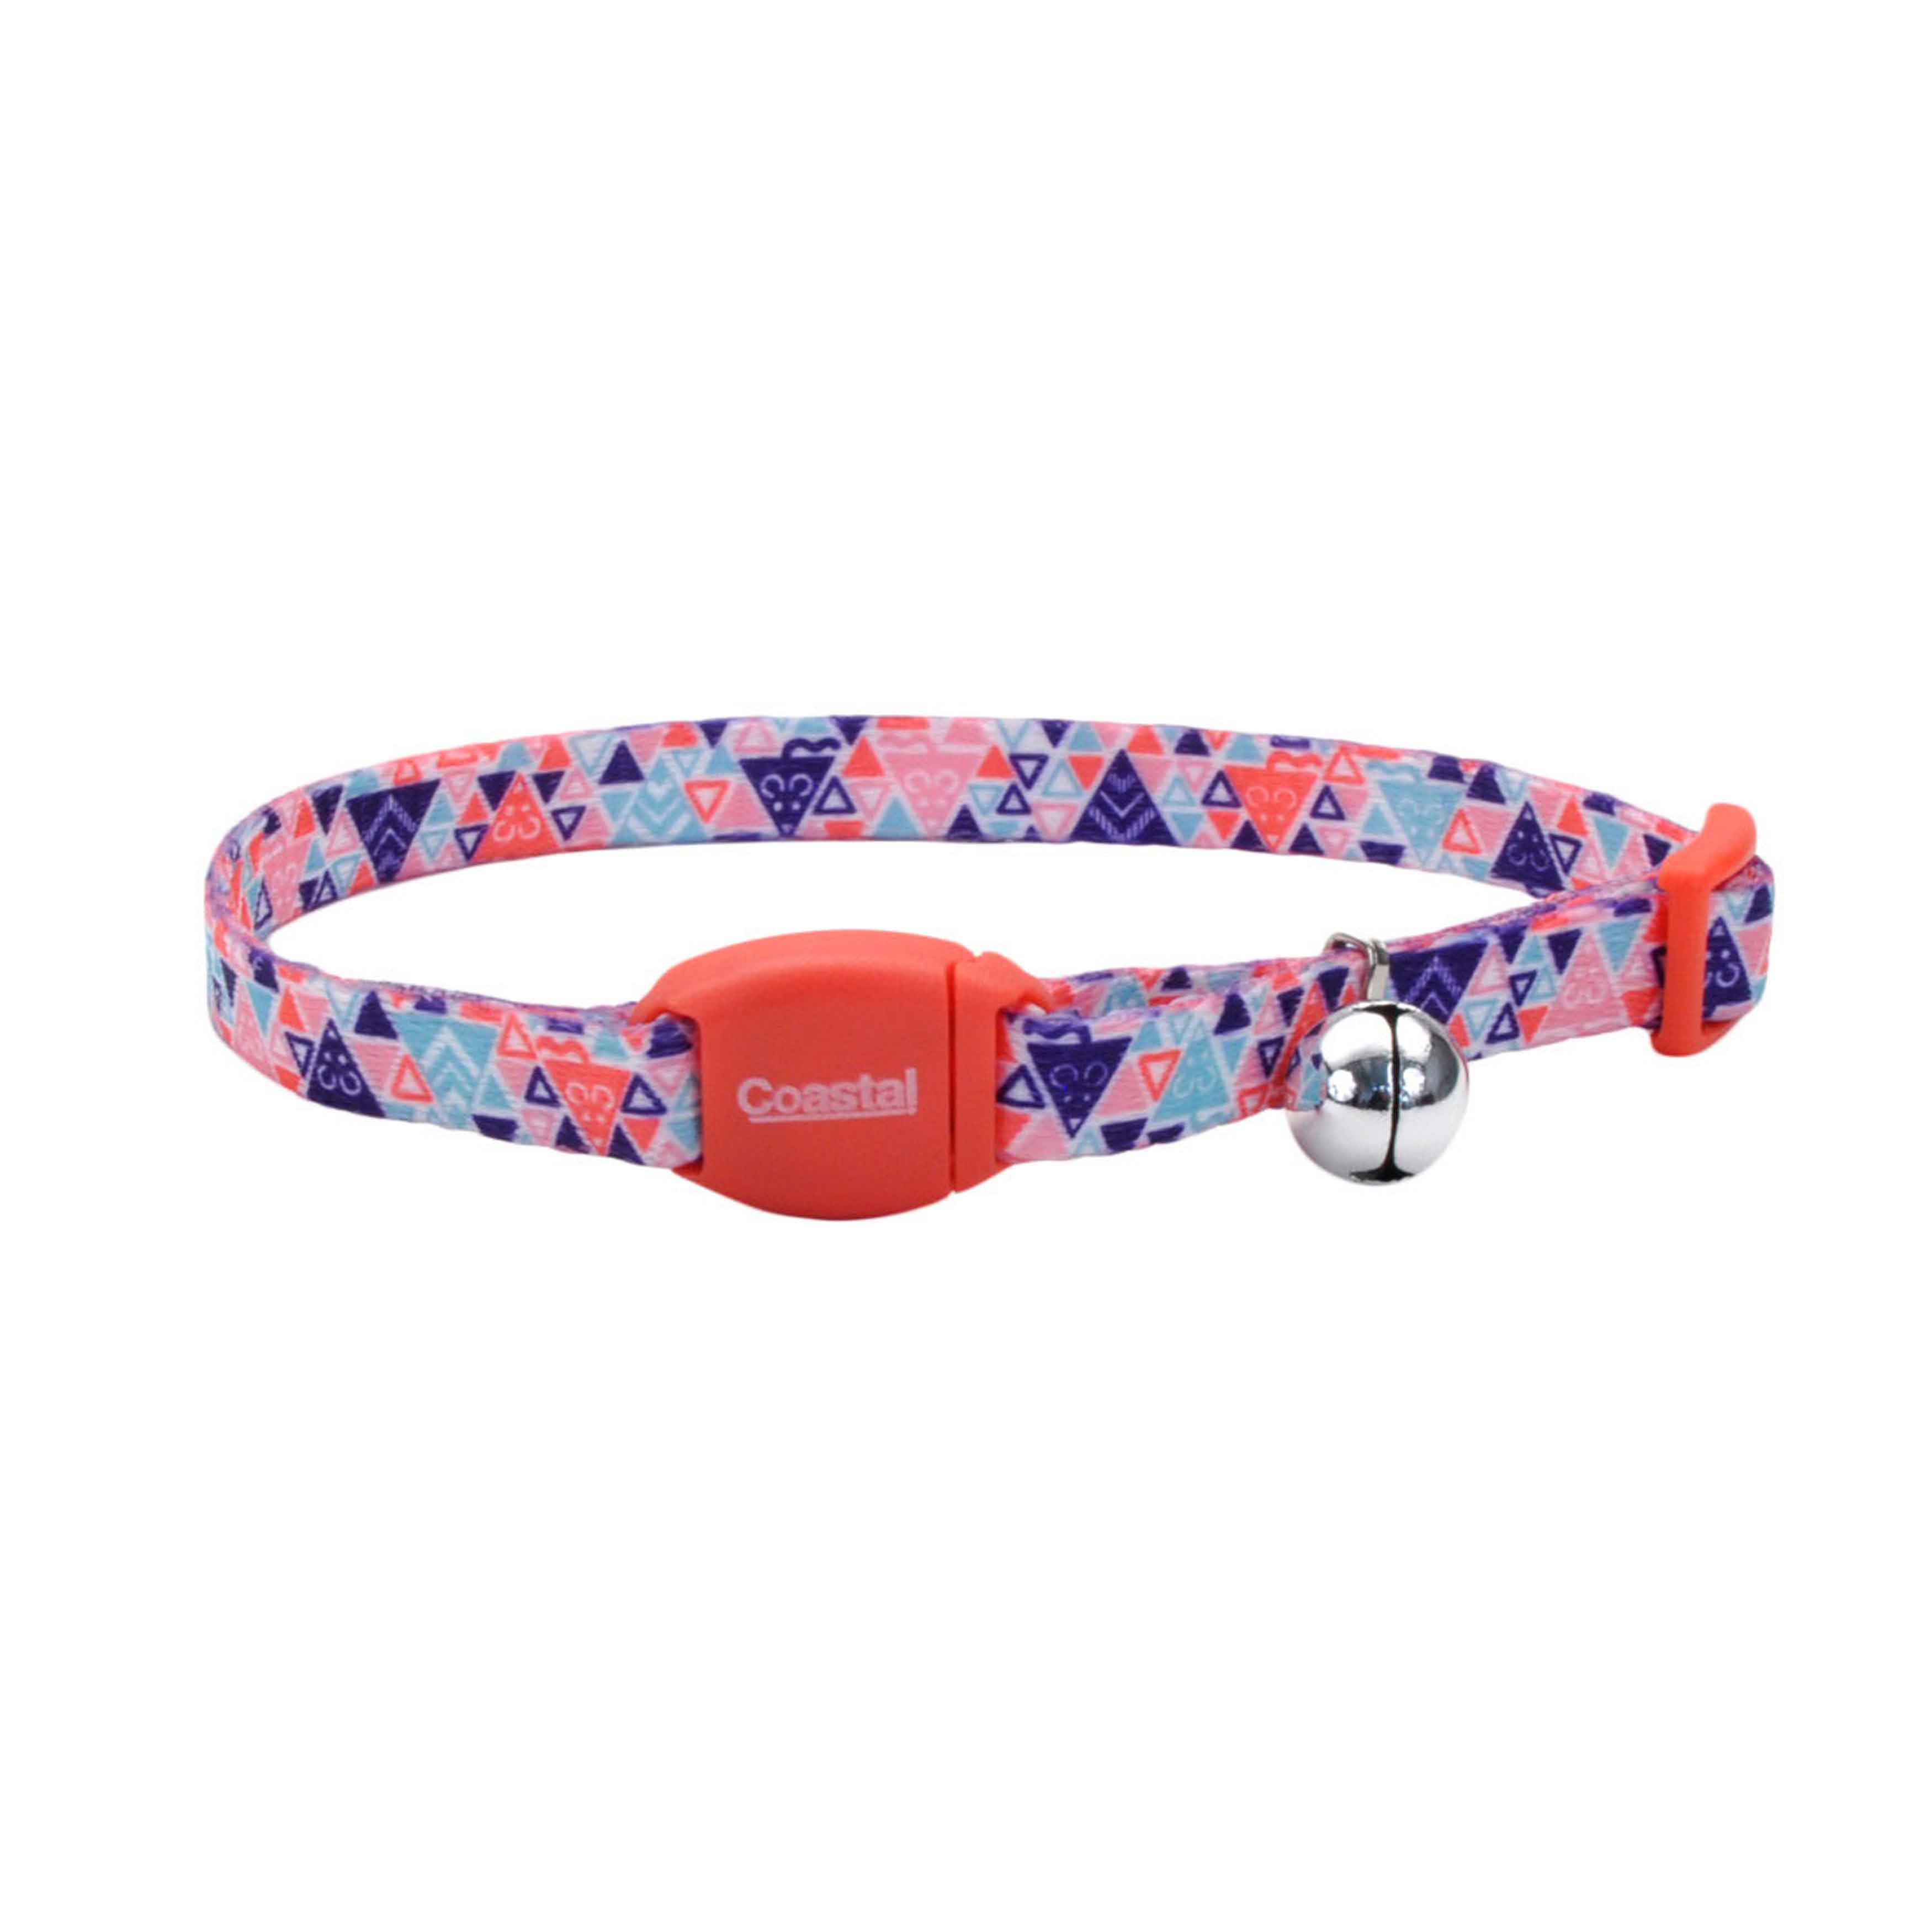 Safe CatÂ® Adjustable Breakaway Cat Collar with Magnetic Buckle, Multi-Colored Triangles, 3/8